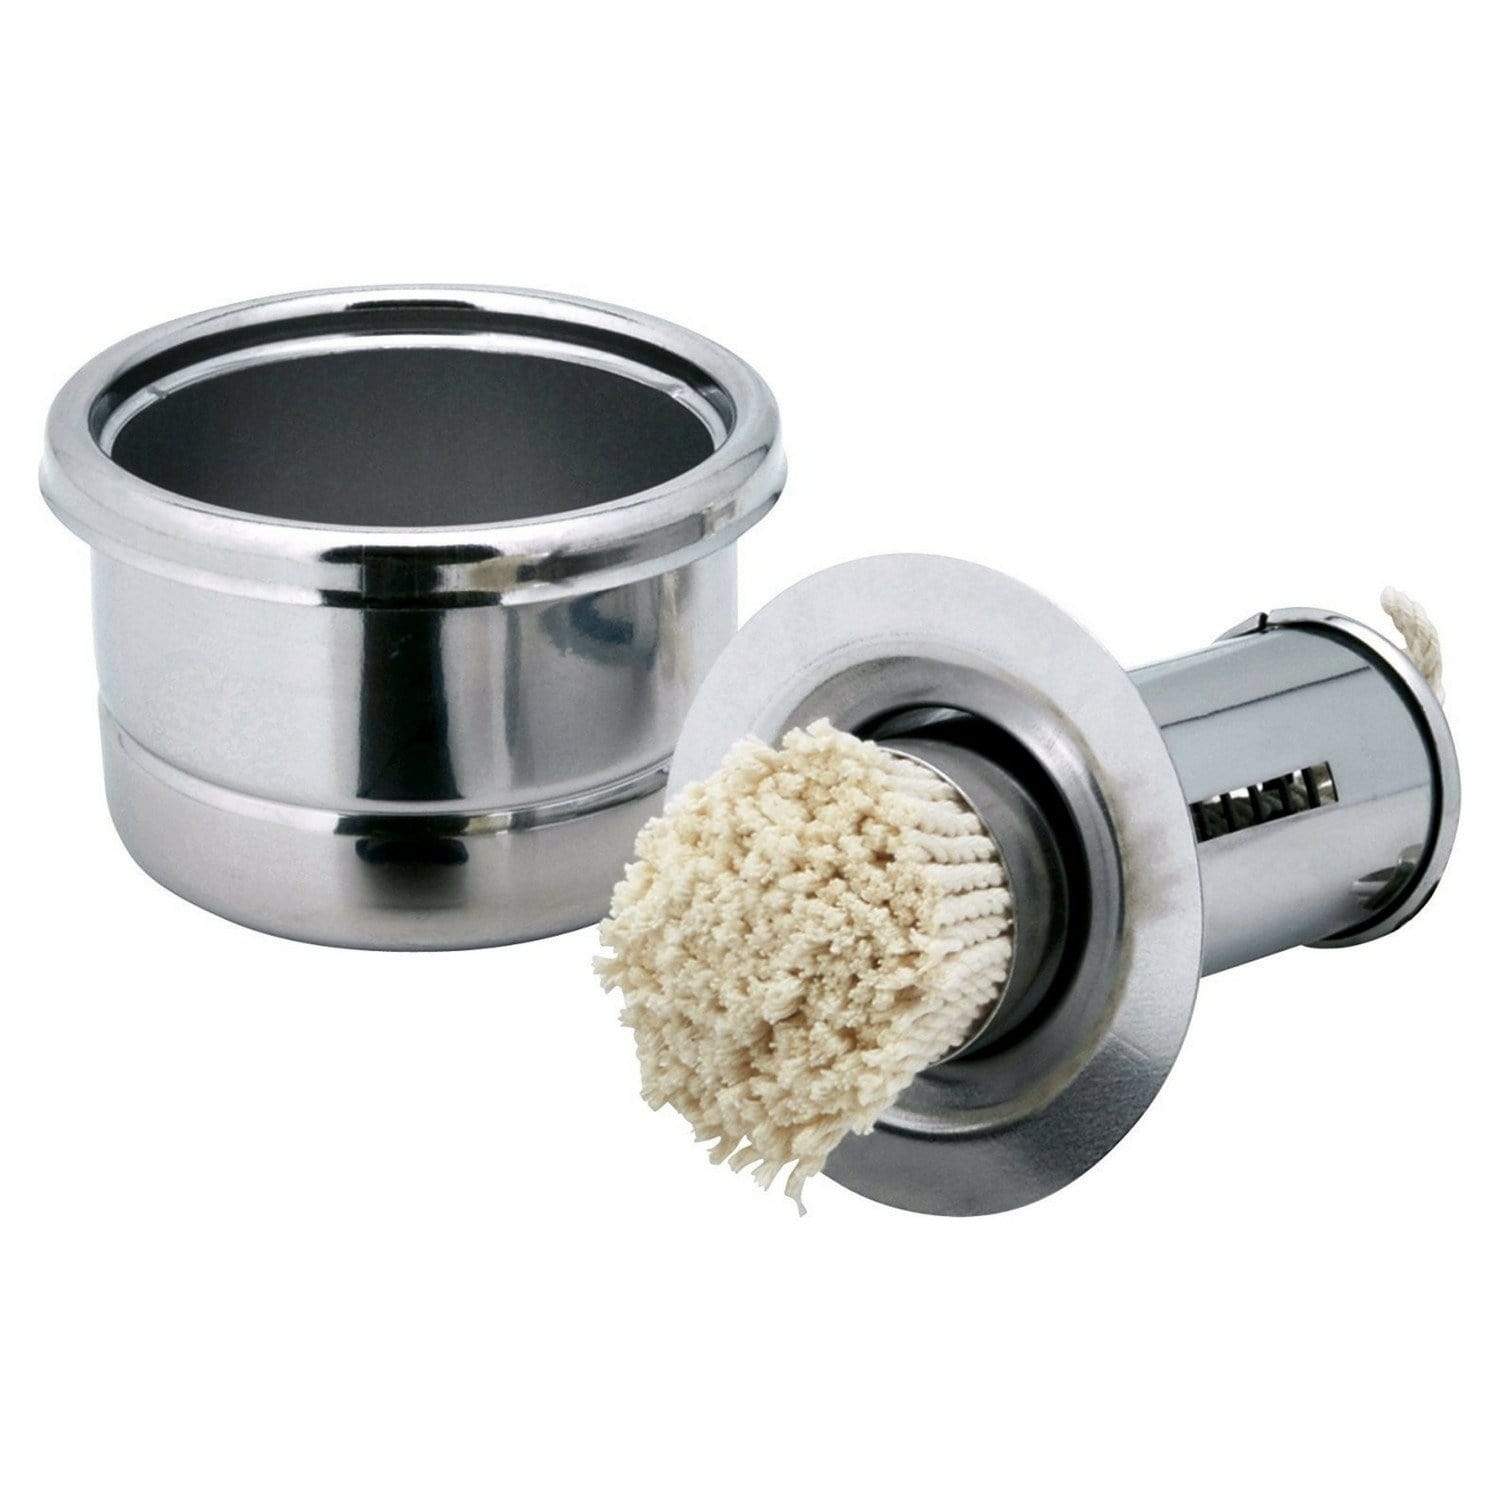 Ichibishi Stainless Steel Takoyaki Basting Mop Oil Dispenser with Removable Cotton Head Small Basting Mops